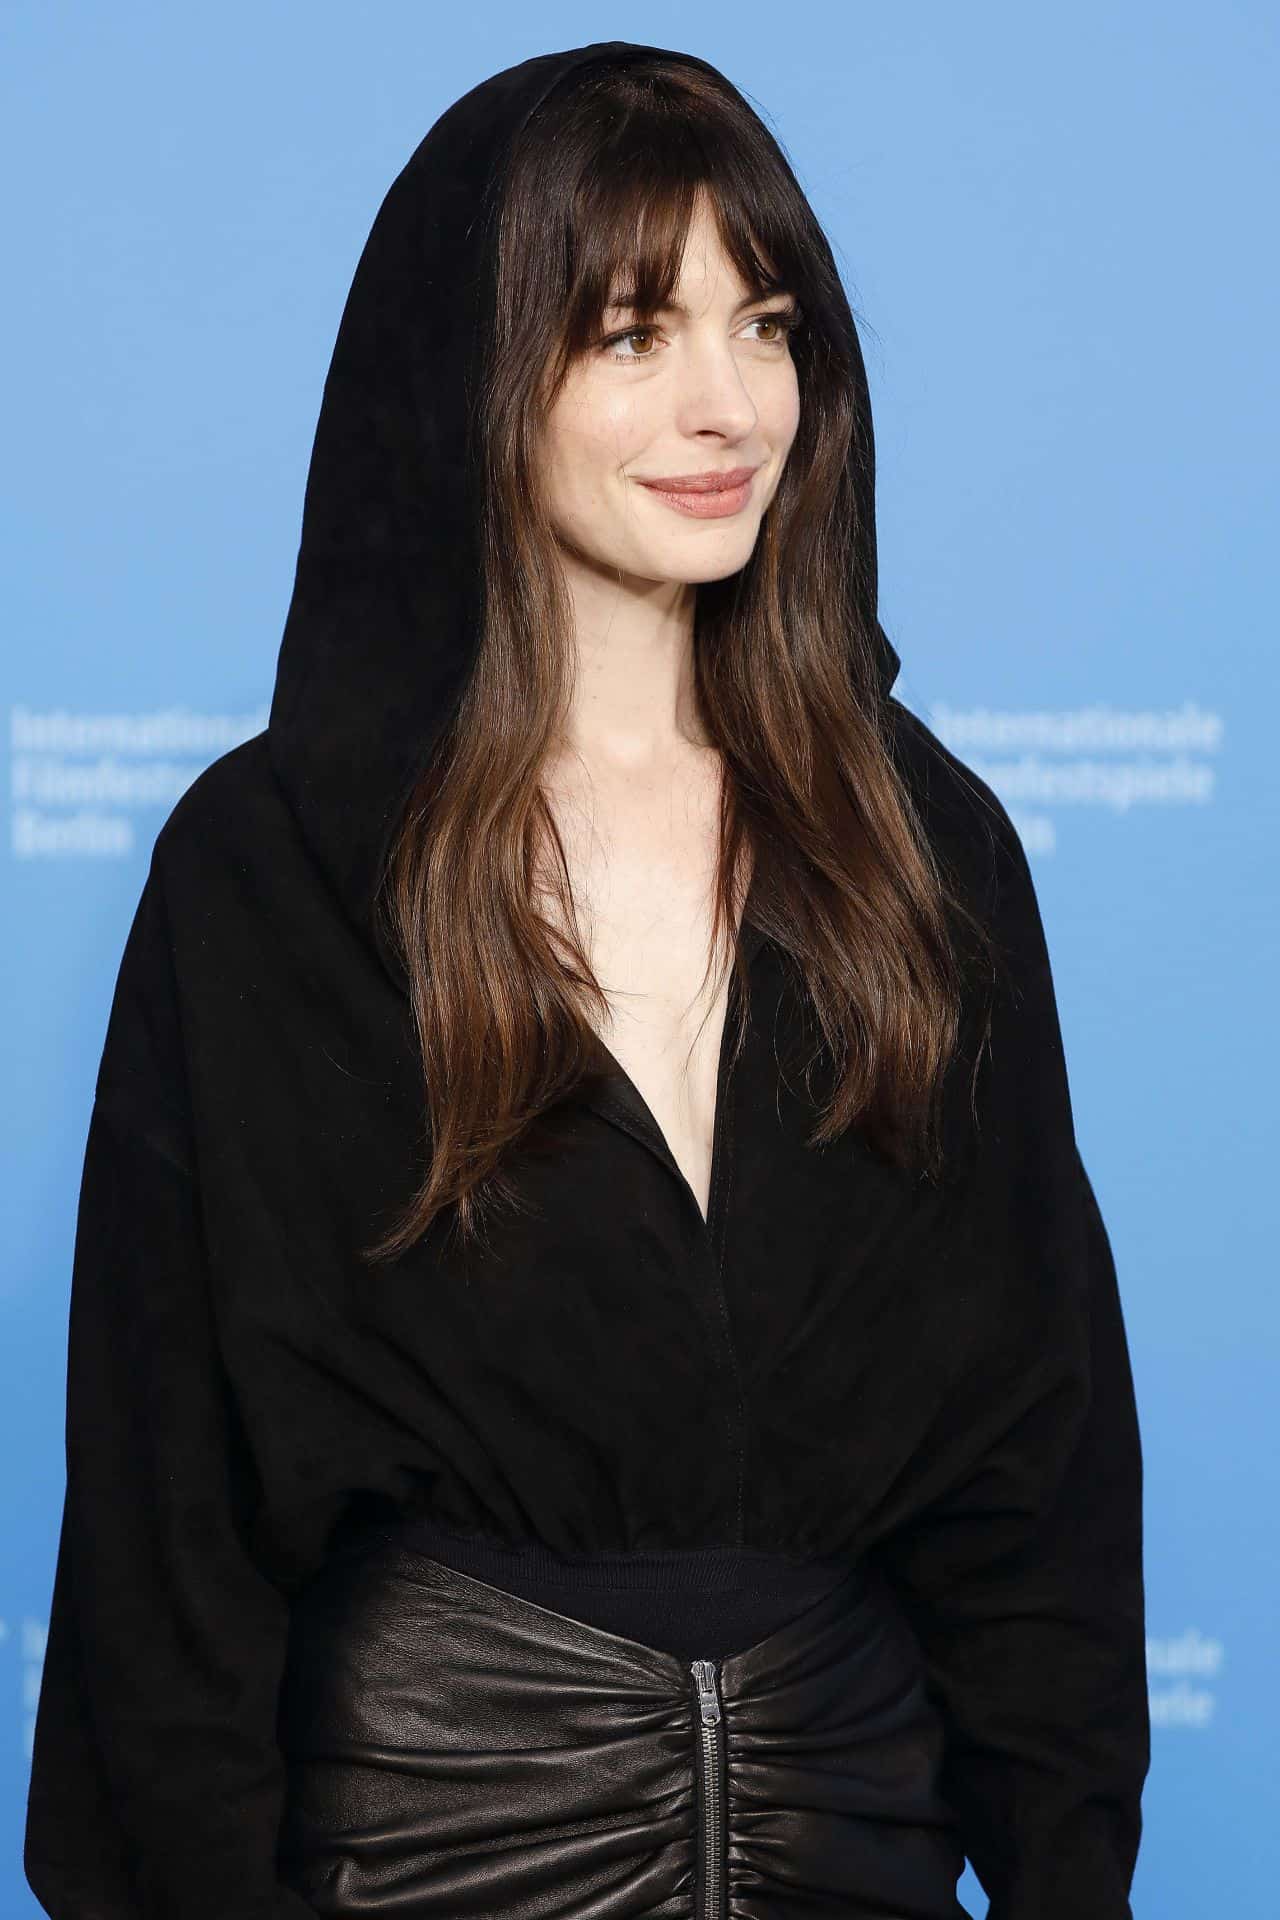 Anne Hathaway Posing at "She Came To Me" Photocall at Berlin Film Festival